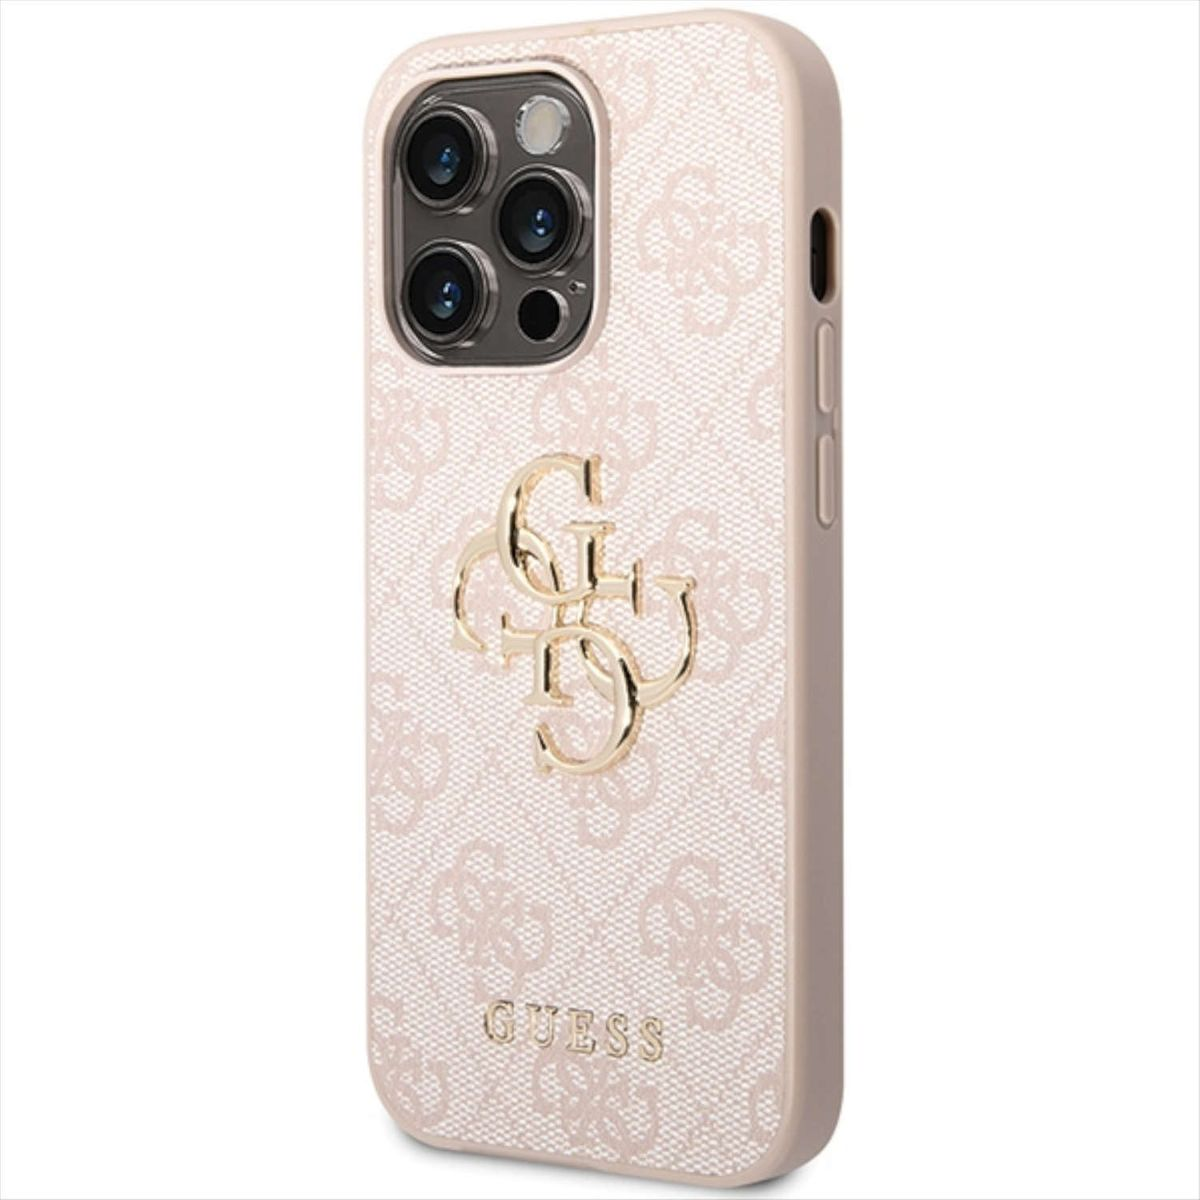 Backcover, iPhone Logo Design GUESS Apple, Pro, Hülle, 4G Gold Pink 15 Metal